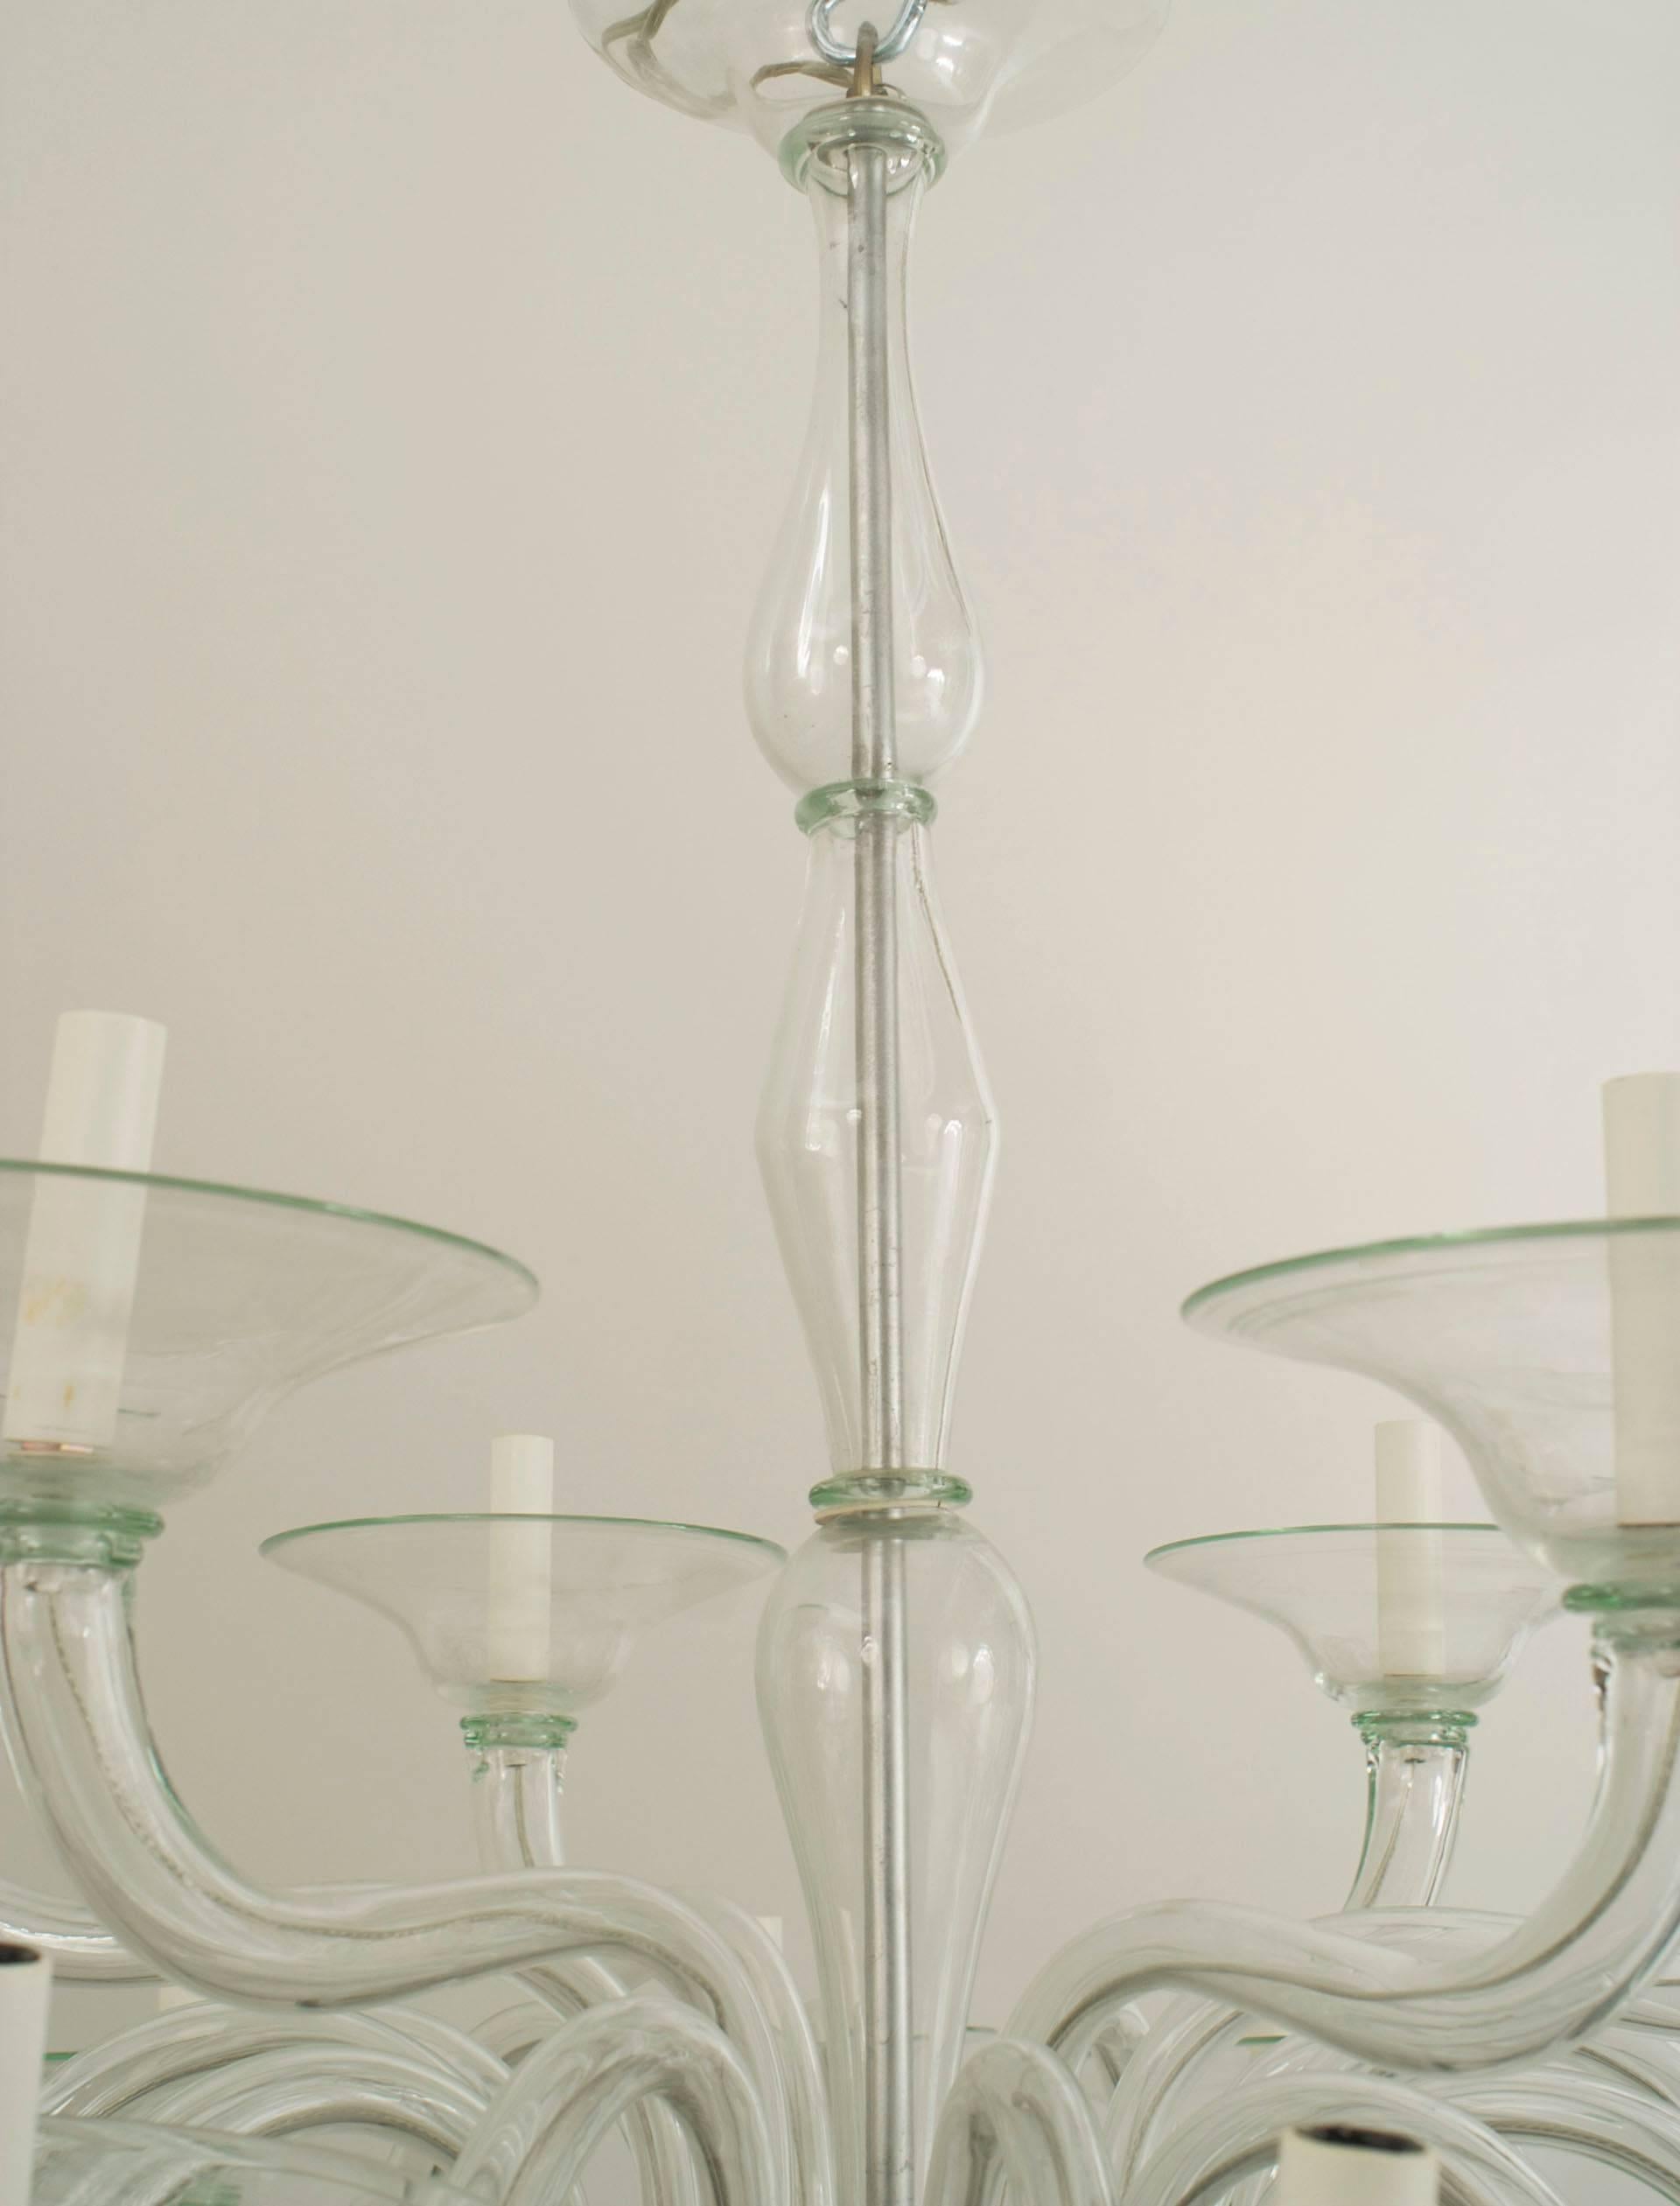 Italian Venetian (1940's) style Murano light green glass chandelier with 2 tiers of 6 and 12 scroll arms emanating from a tiered centerpost with disc form bobeches cups and a finial bottom.
